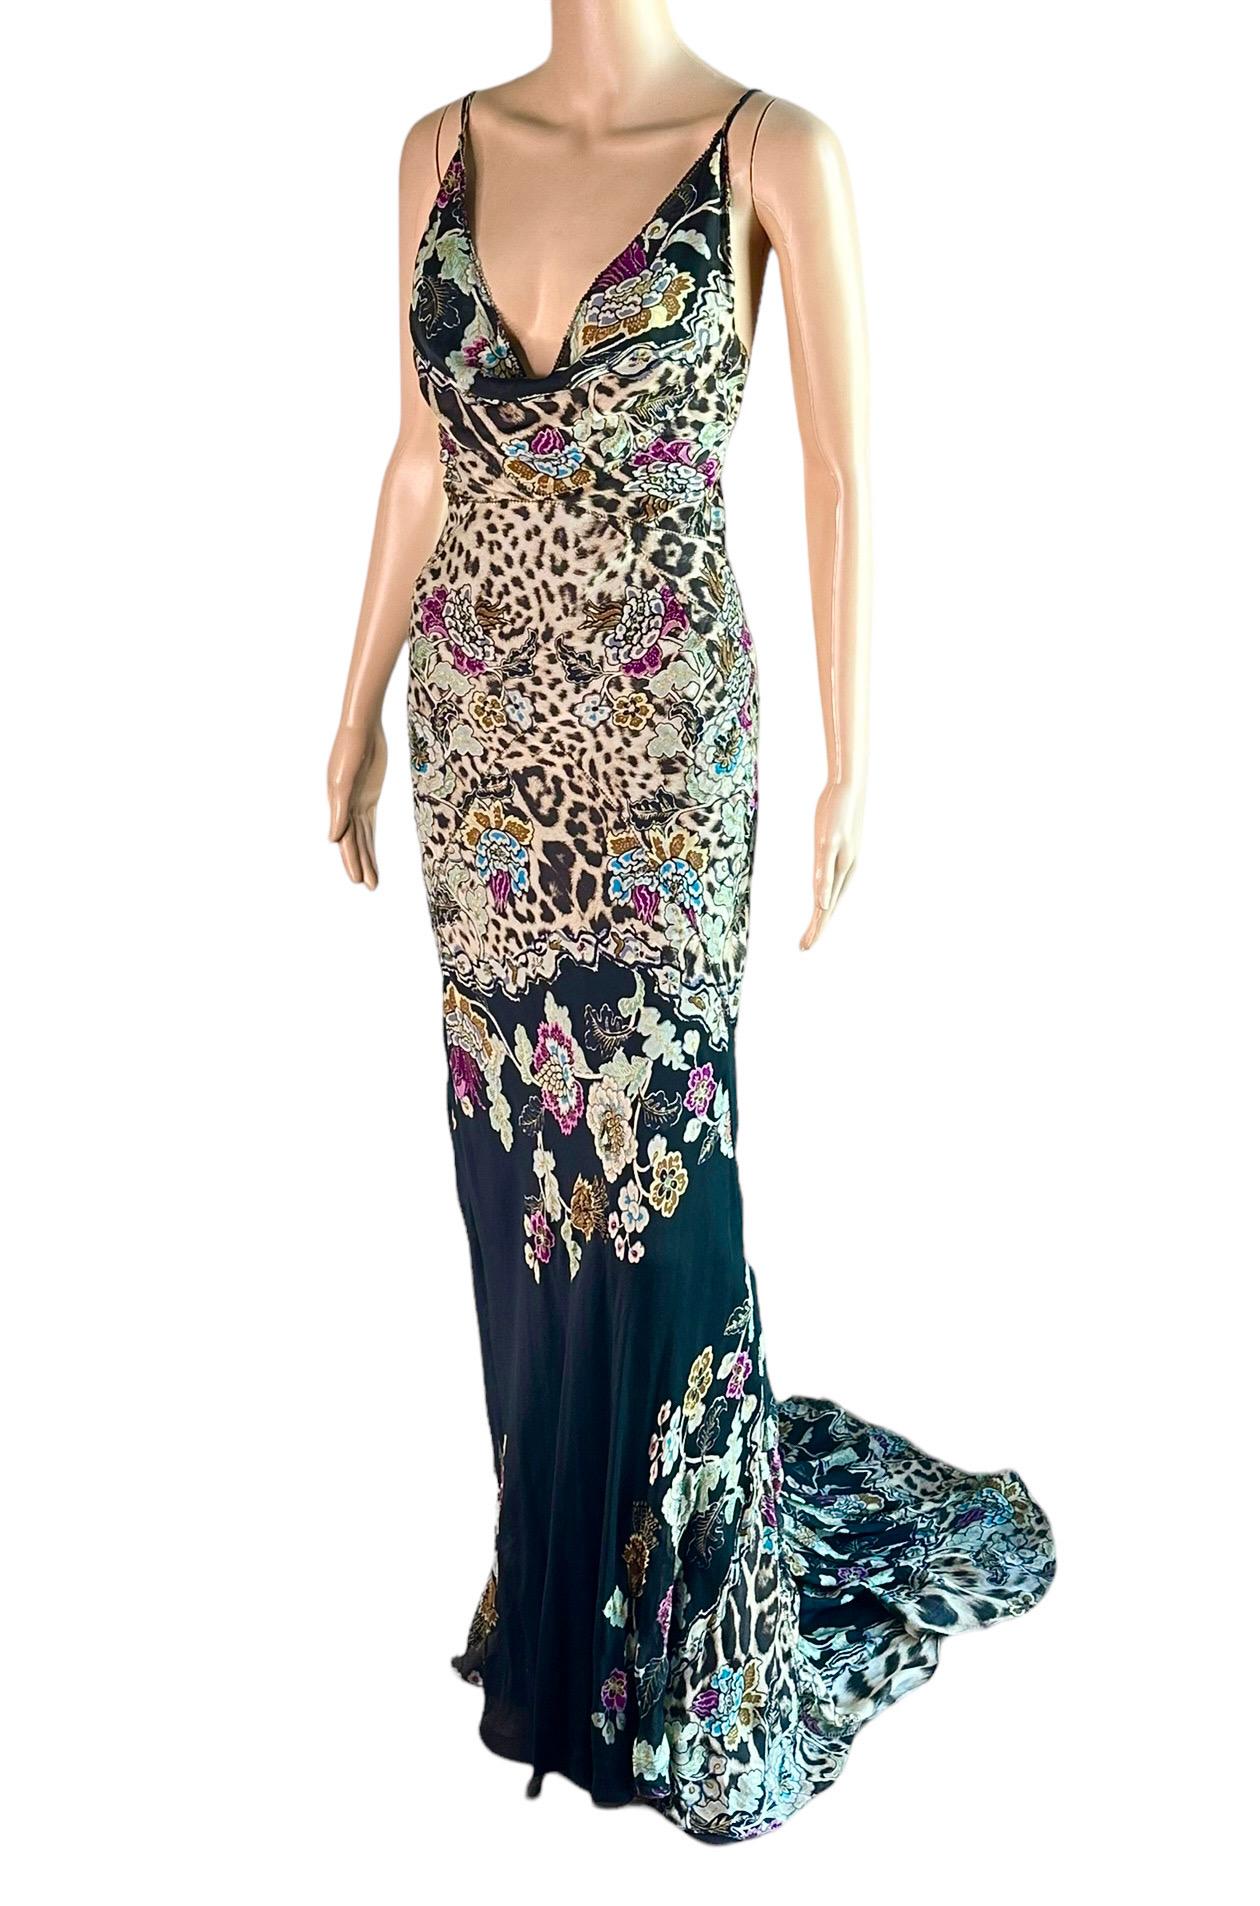 Roberto Cavalli S/S 2003 Chinoiserie Print Silk Train Maxi Evening Dress Gown For Sale 6